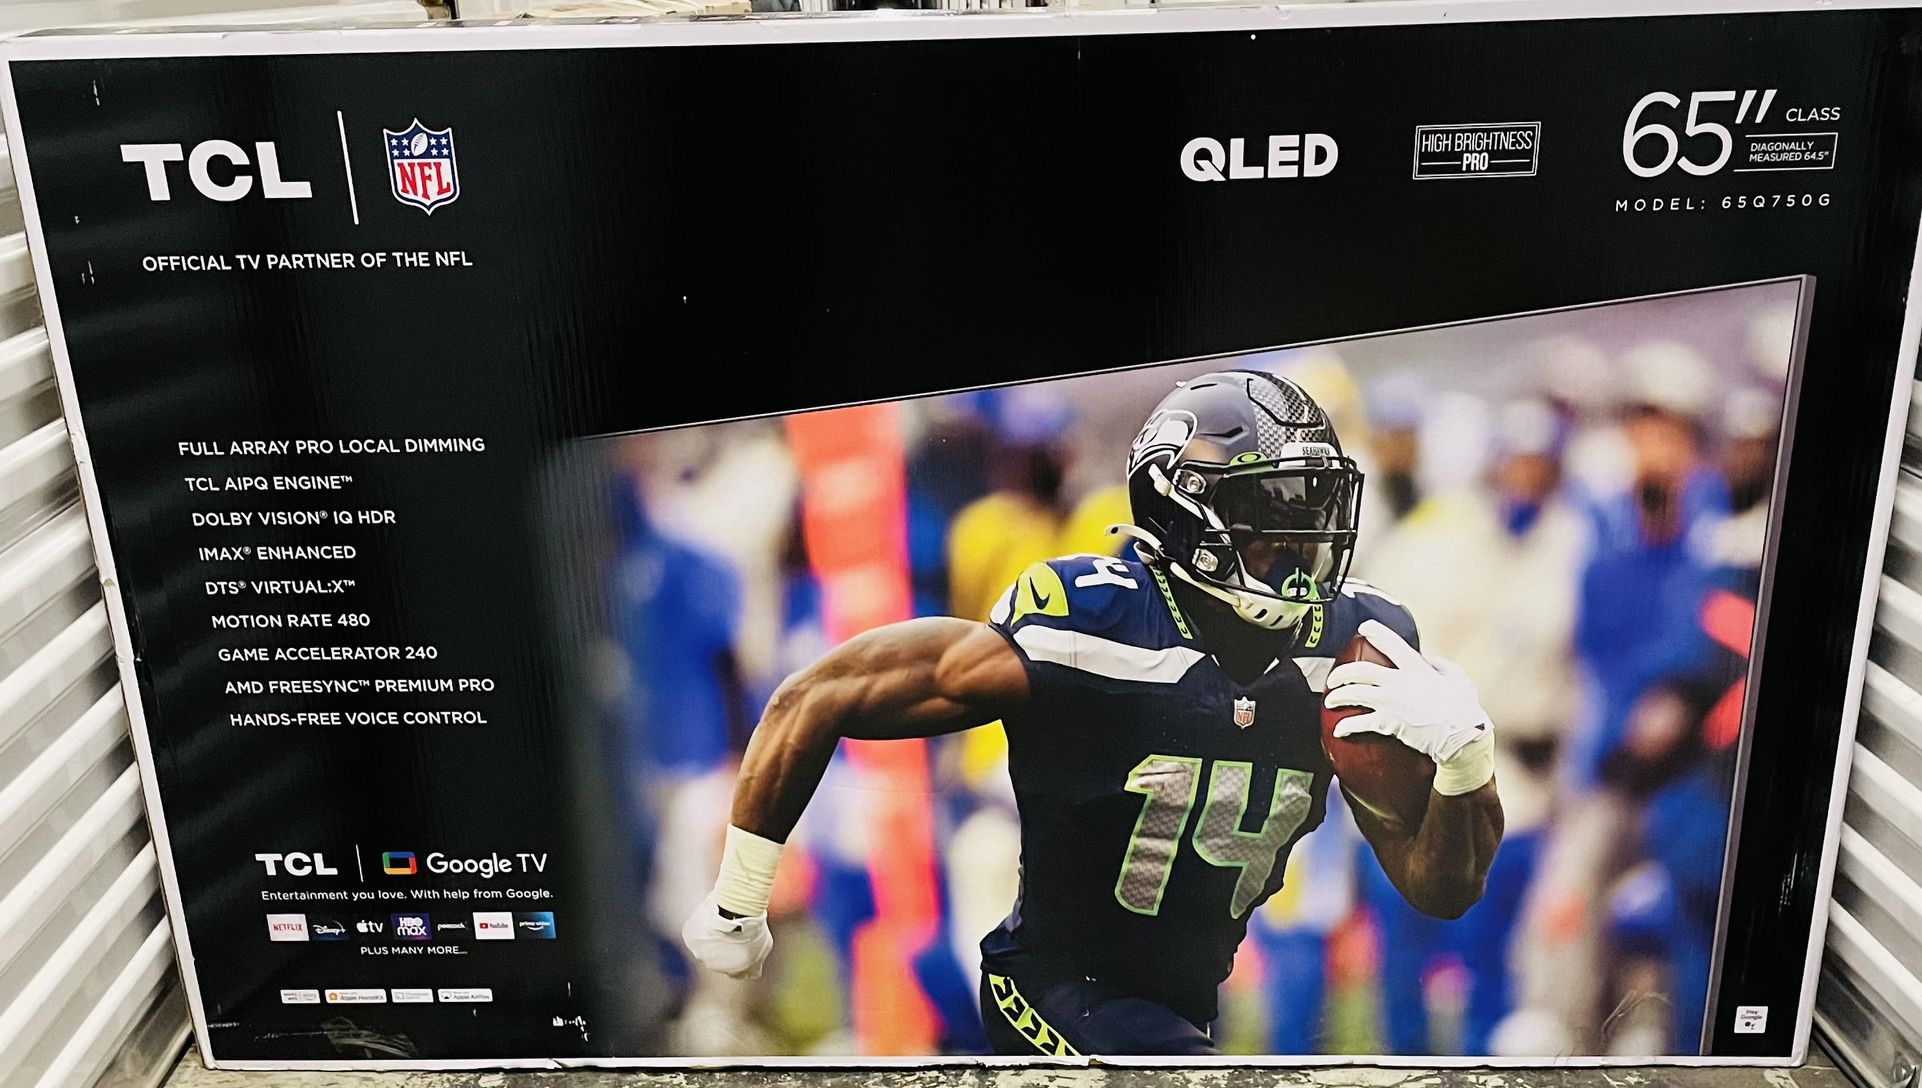 TCL 65 Inch QLED Smart TV- New In Box 